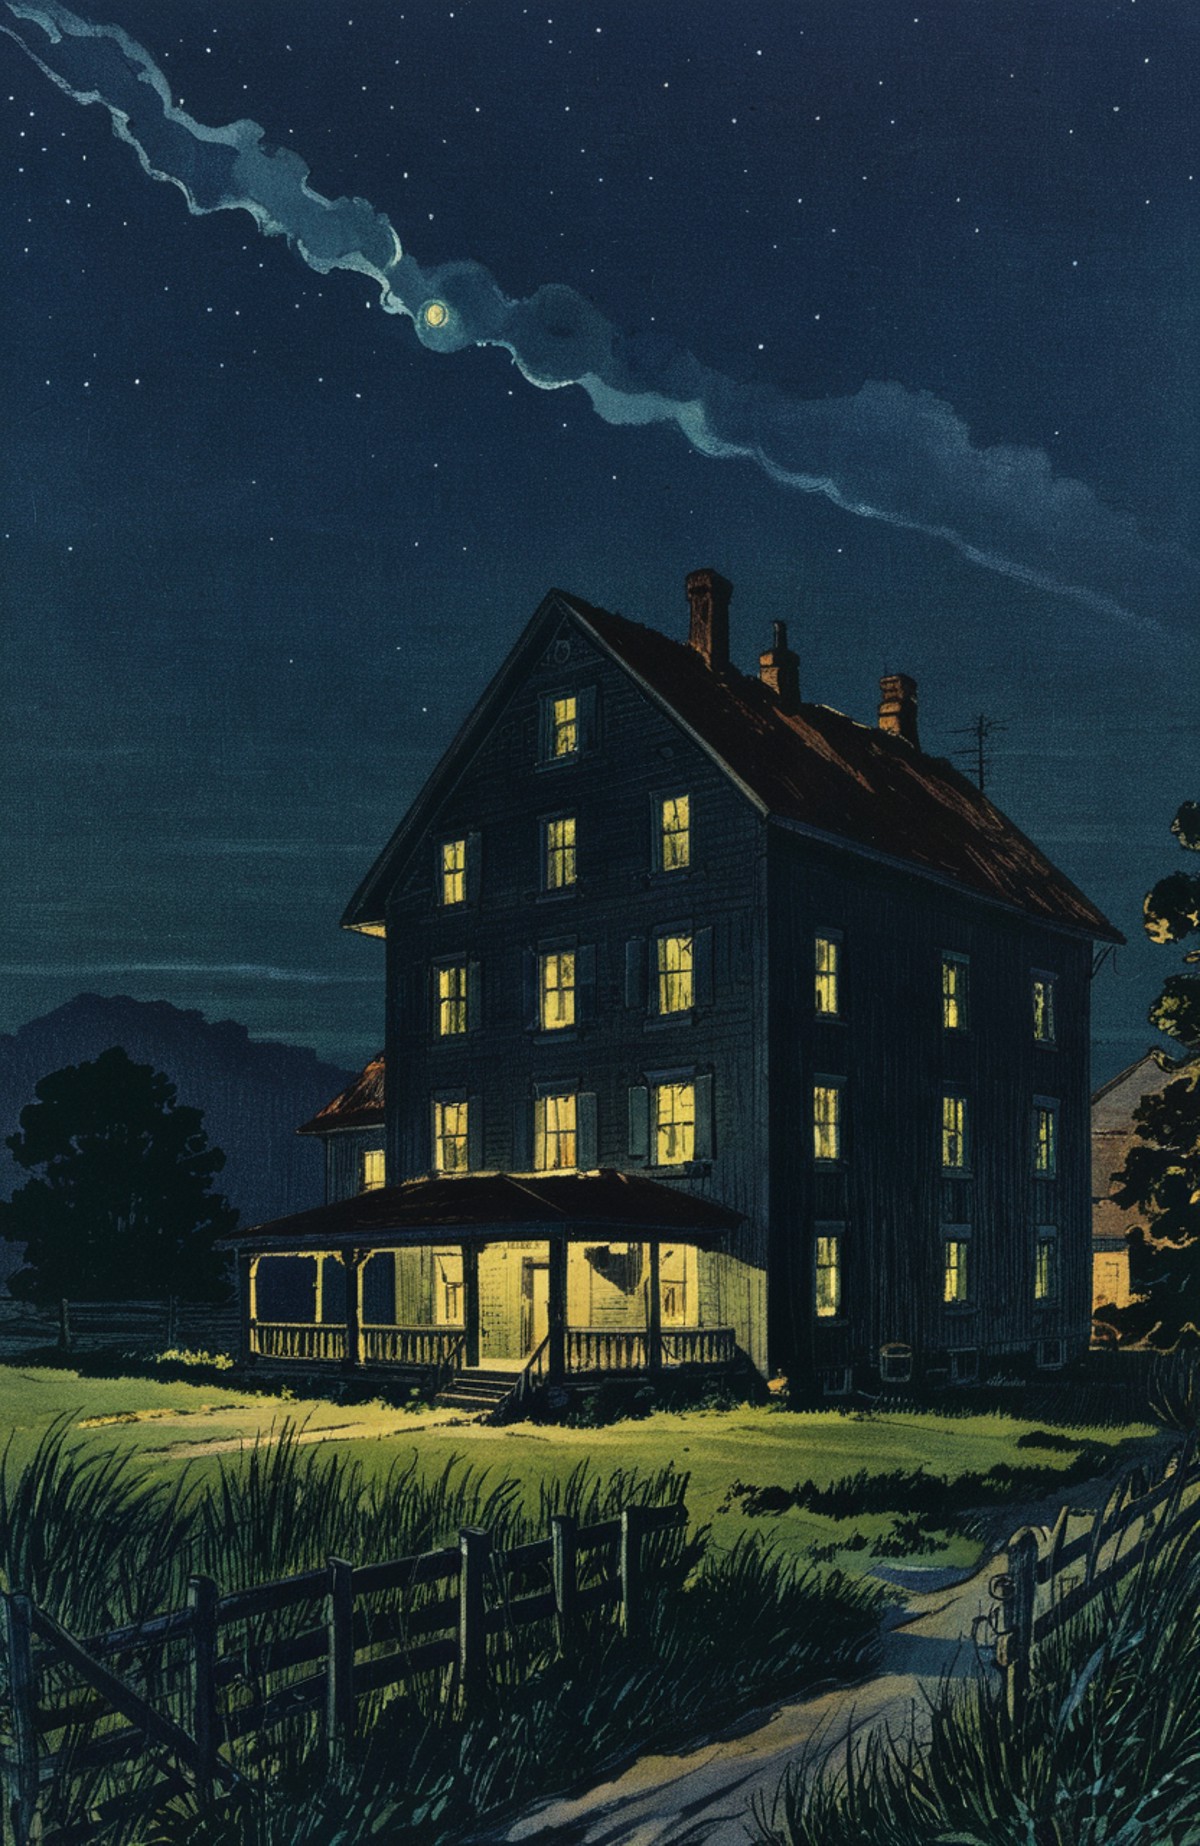 vintage illustration, dark and gritty, a farm house at night, lights shining from the windows, farm land in the background